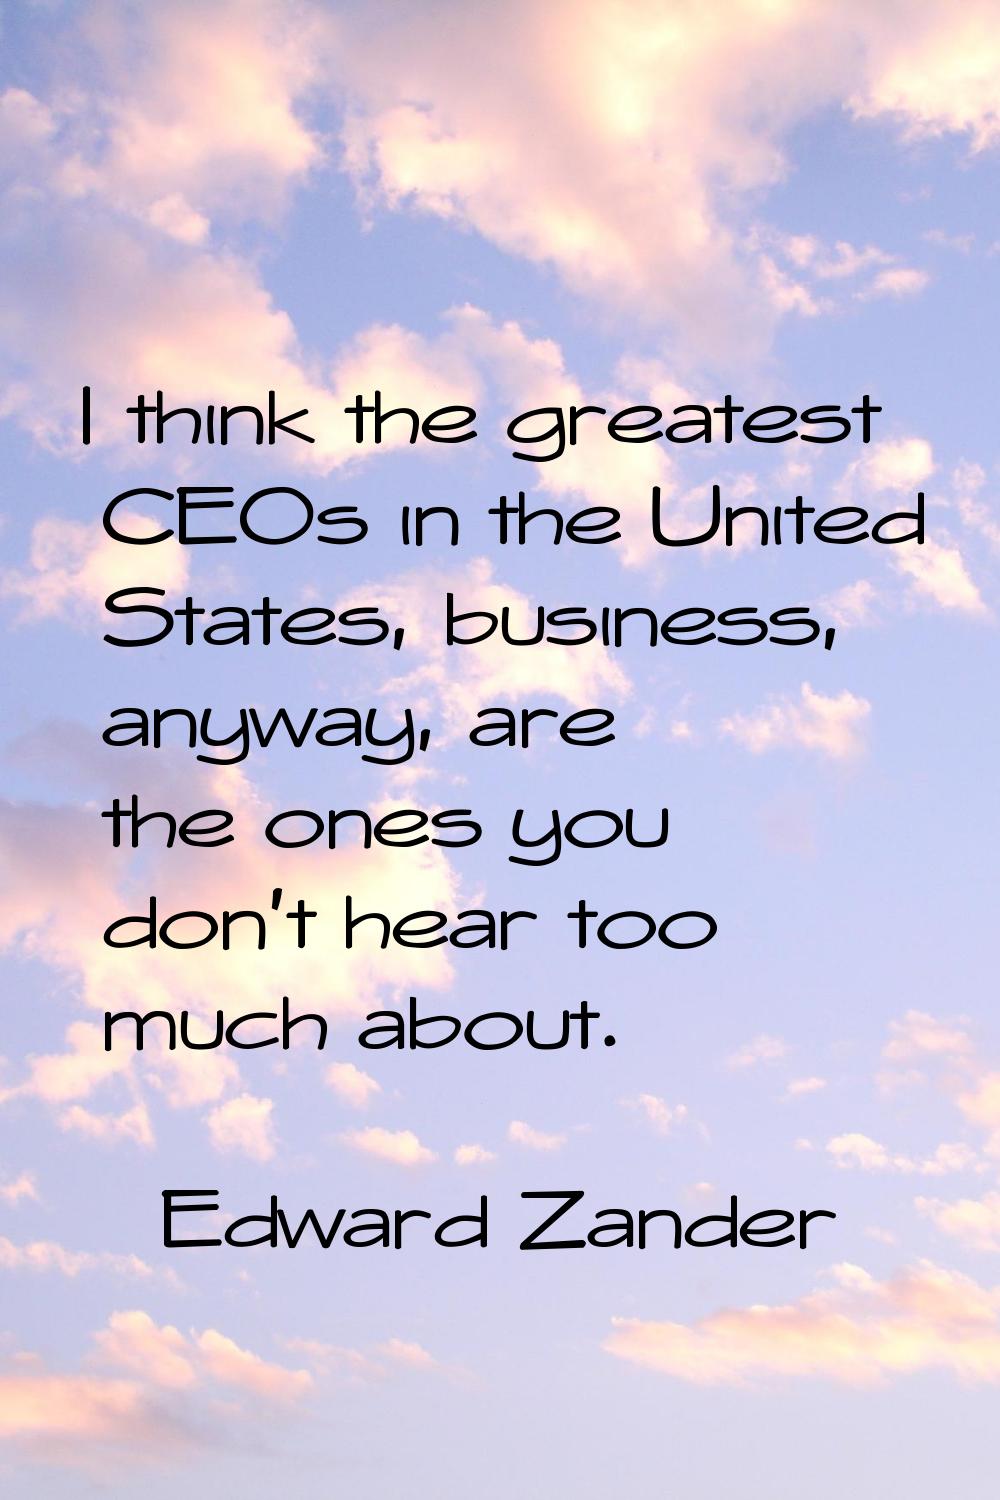 I think the greatest CEOs in the United States, business, anyway, are the ones you don't hear too m